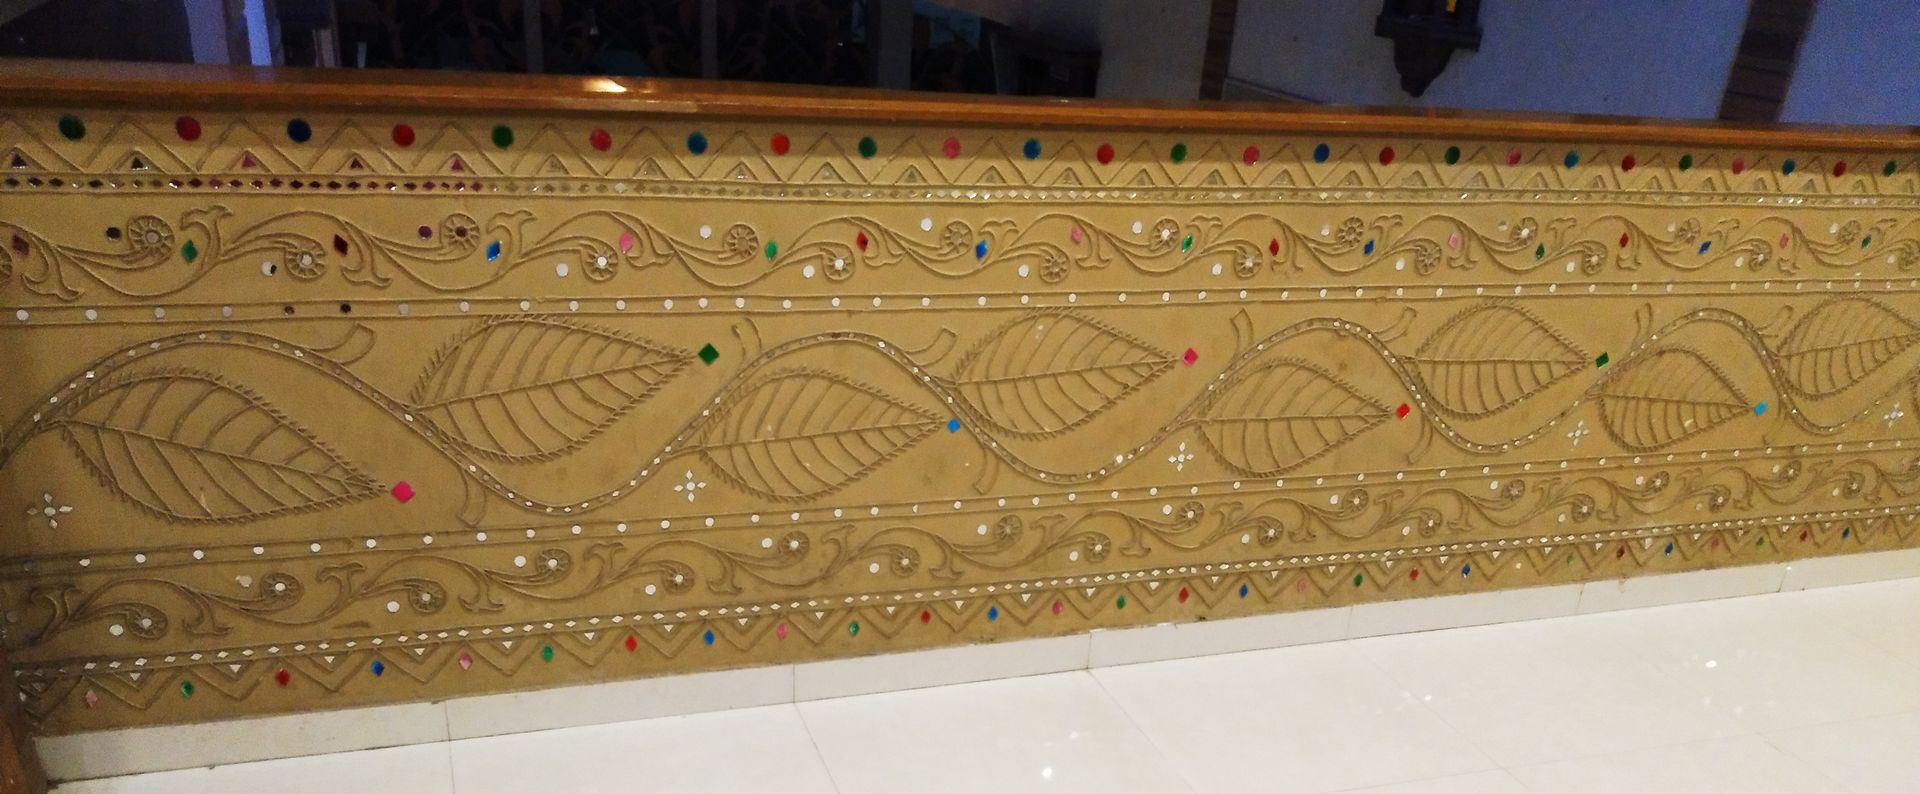 mud mirror work Mud And Mirror Wall Art, Lippan Work Wall Art, Mud Work Art, Mud Work Wall Decor, Mud Mirror Paintings and Mud Wall Paintings from Ahmadabad, Gujarat India., Inside Out Interior Inside Out Interior Ingresso, Corridoio & Scale in stile classico